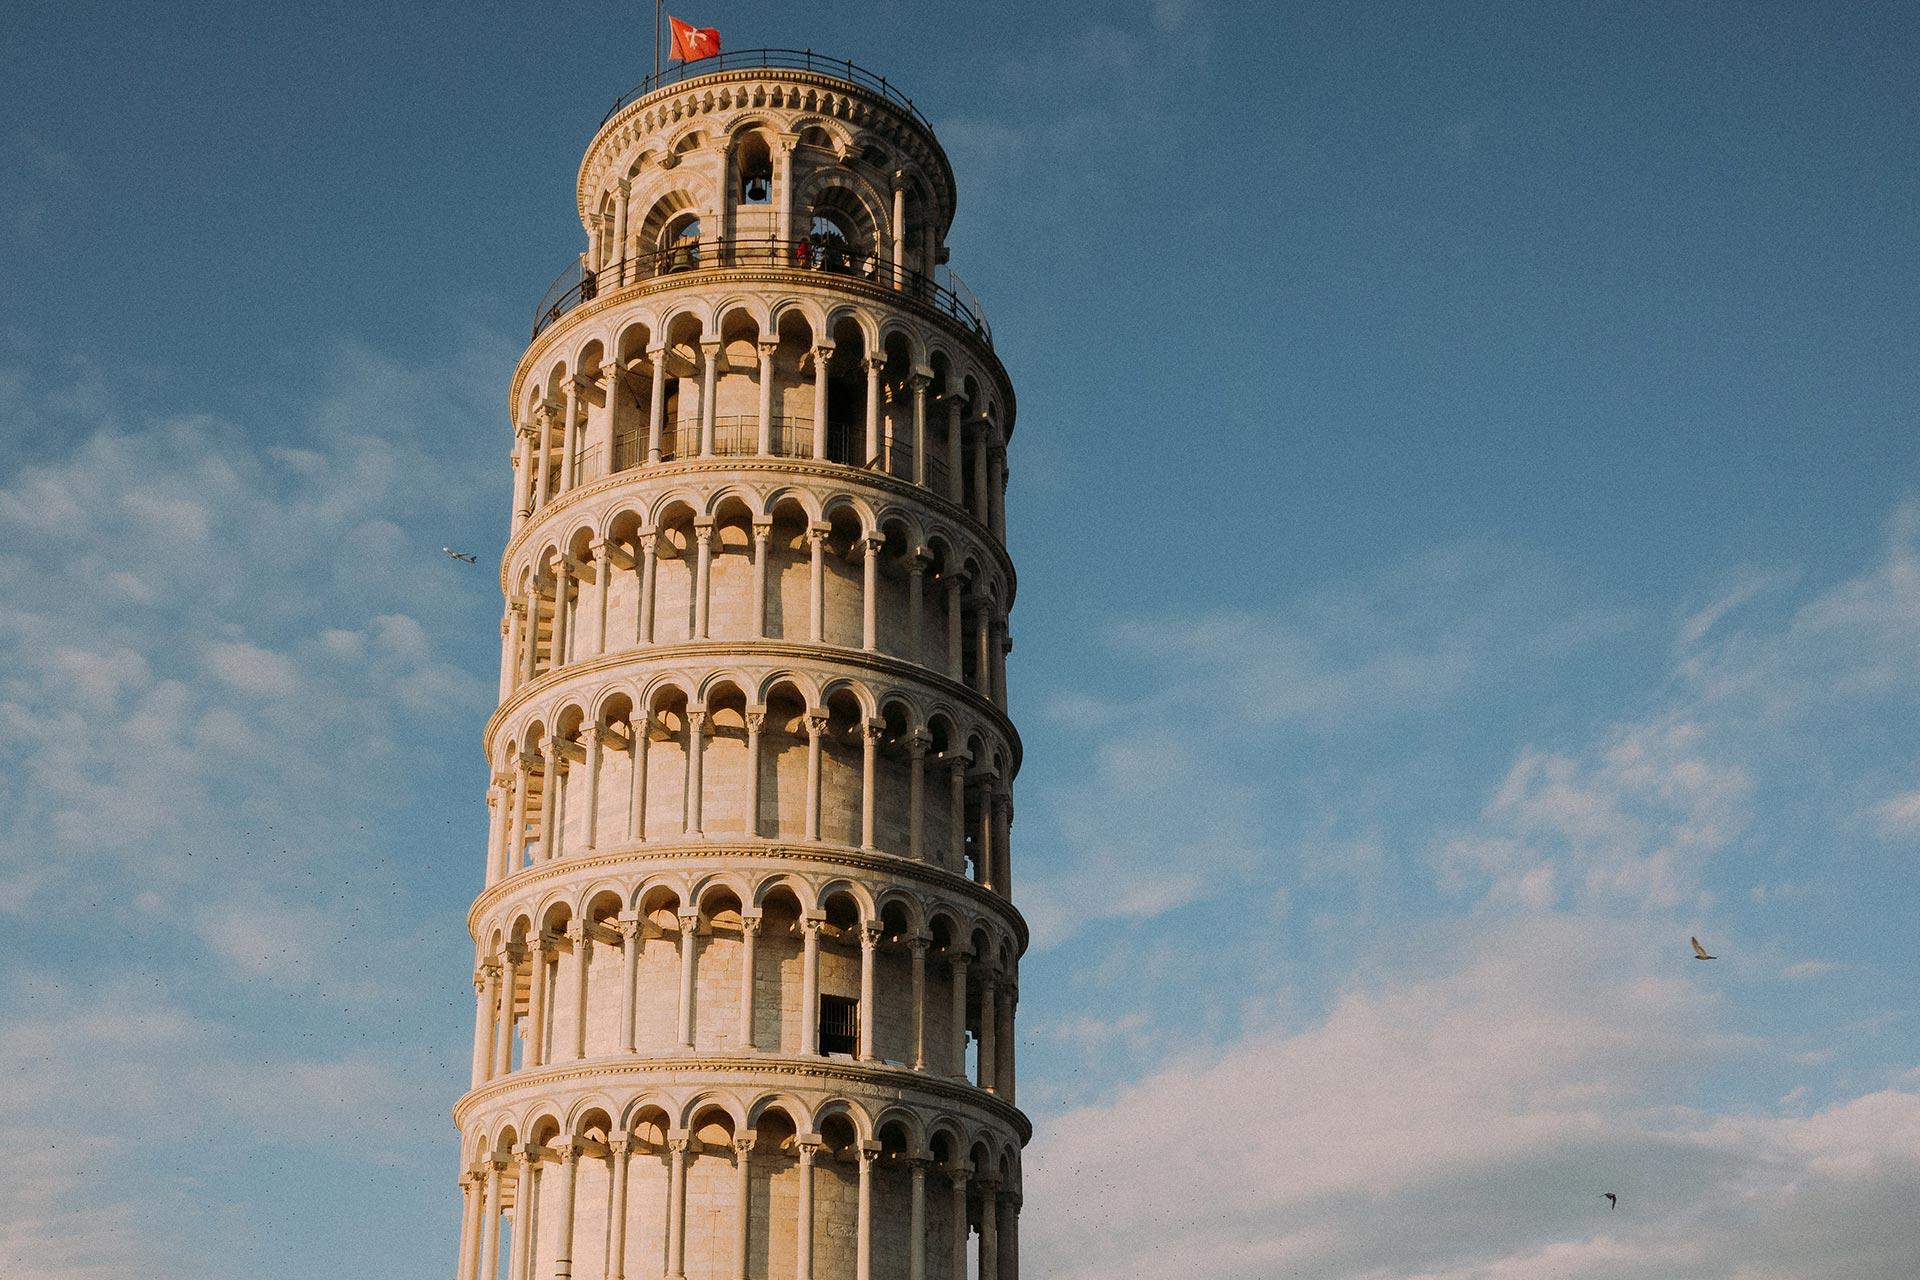 Leaning Tower